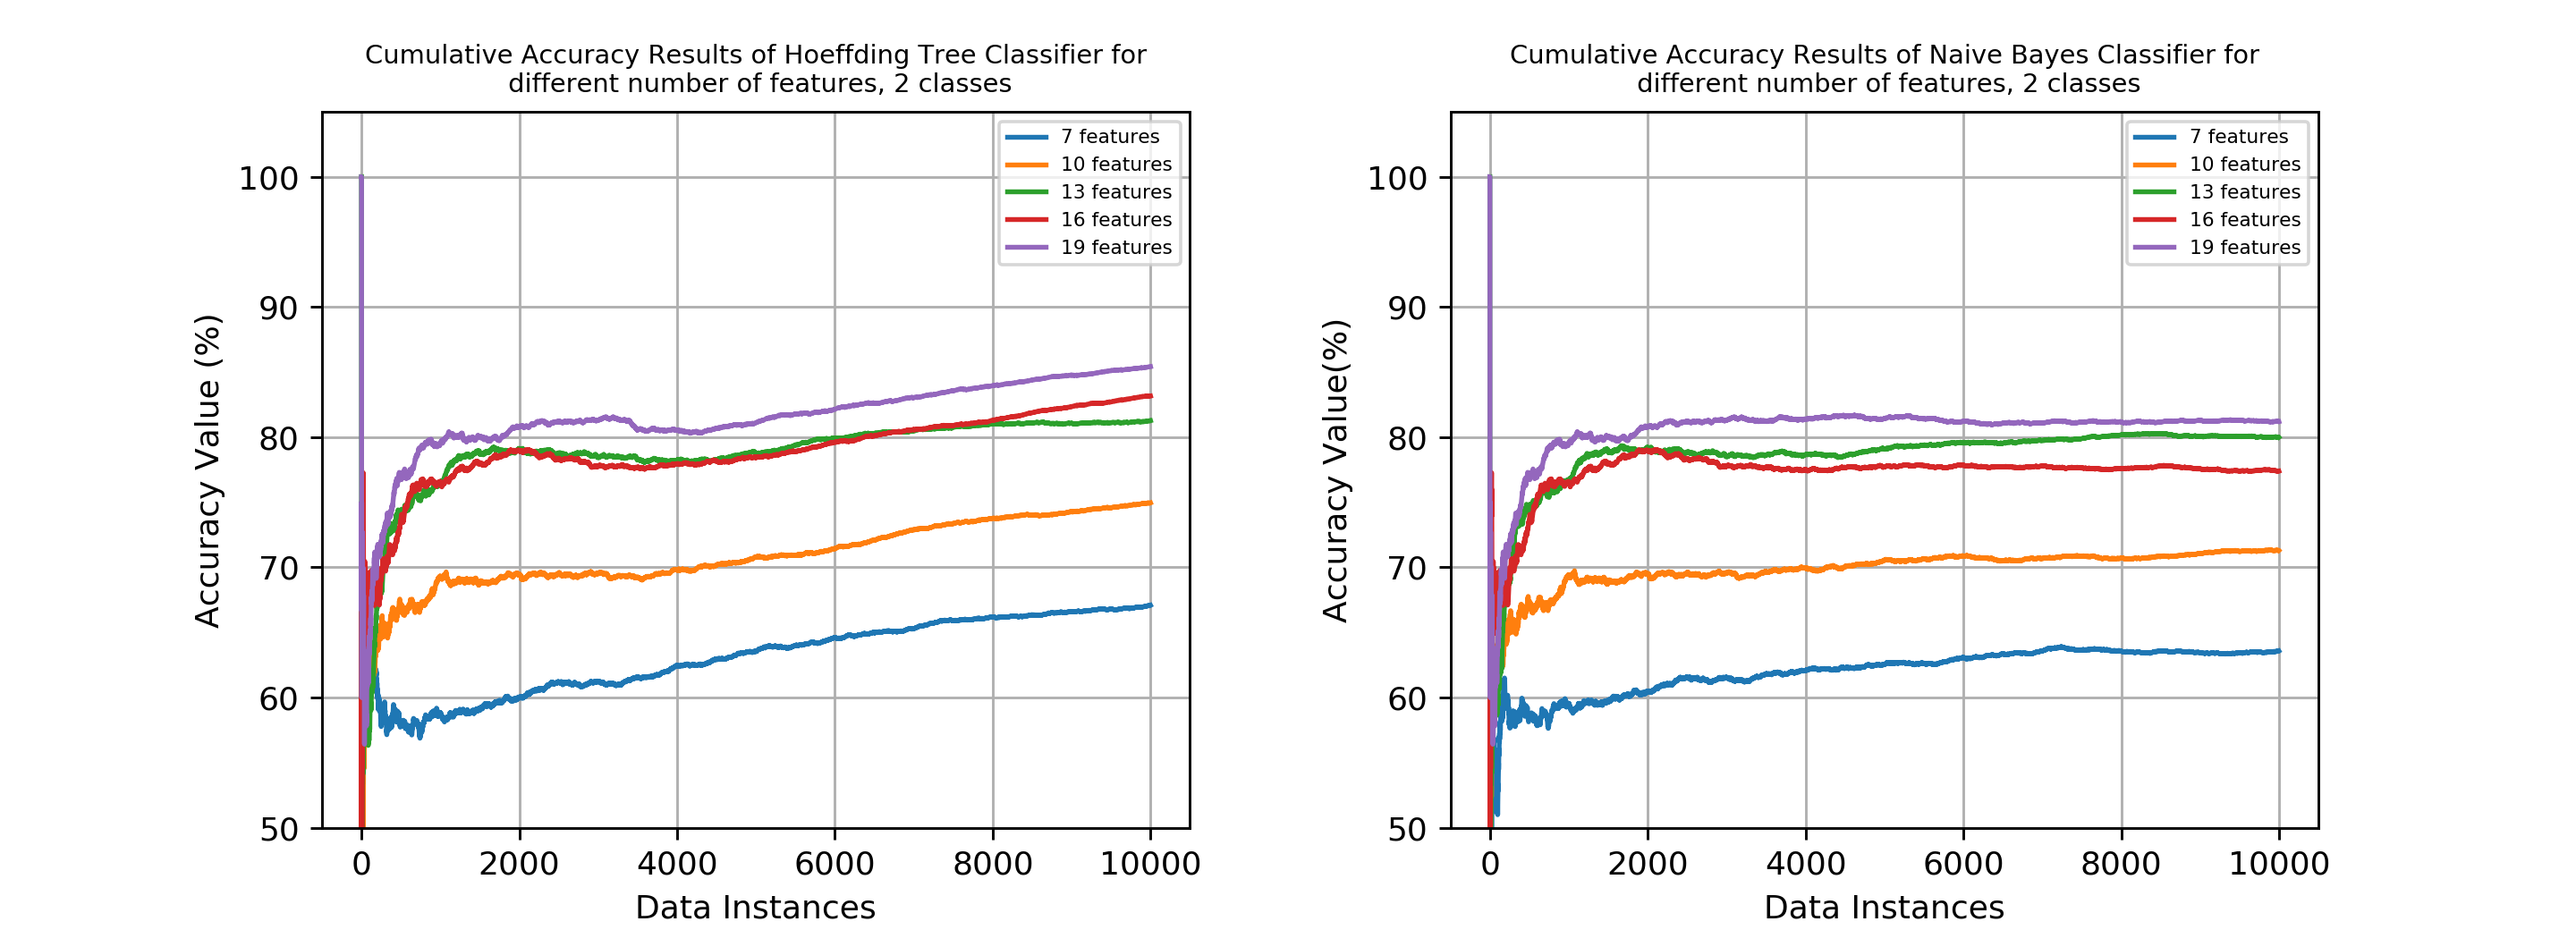 Cumulative Accuracy Results of HT and NB classifiers with different number of features and 2 classes